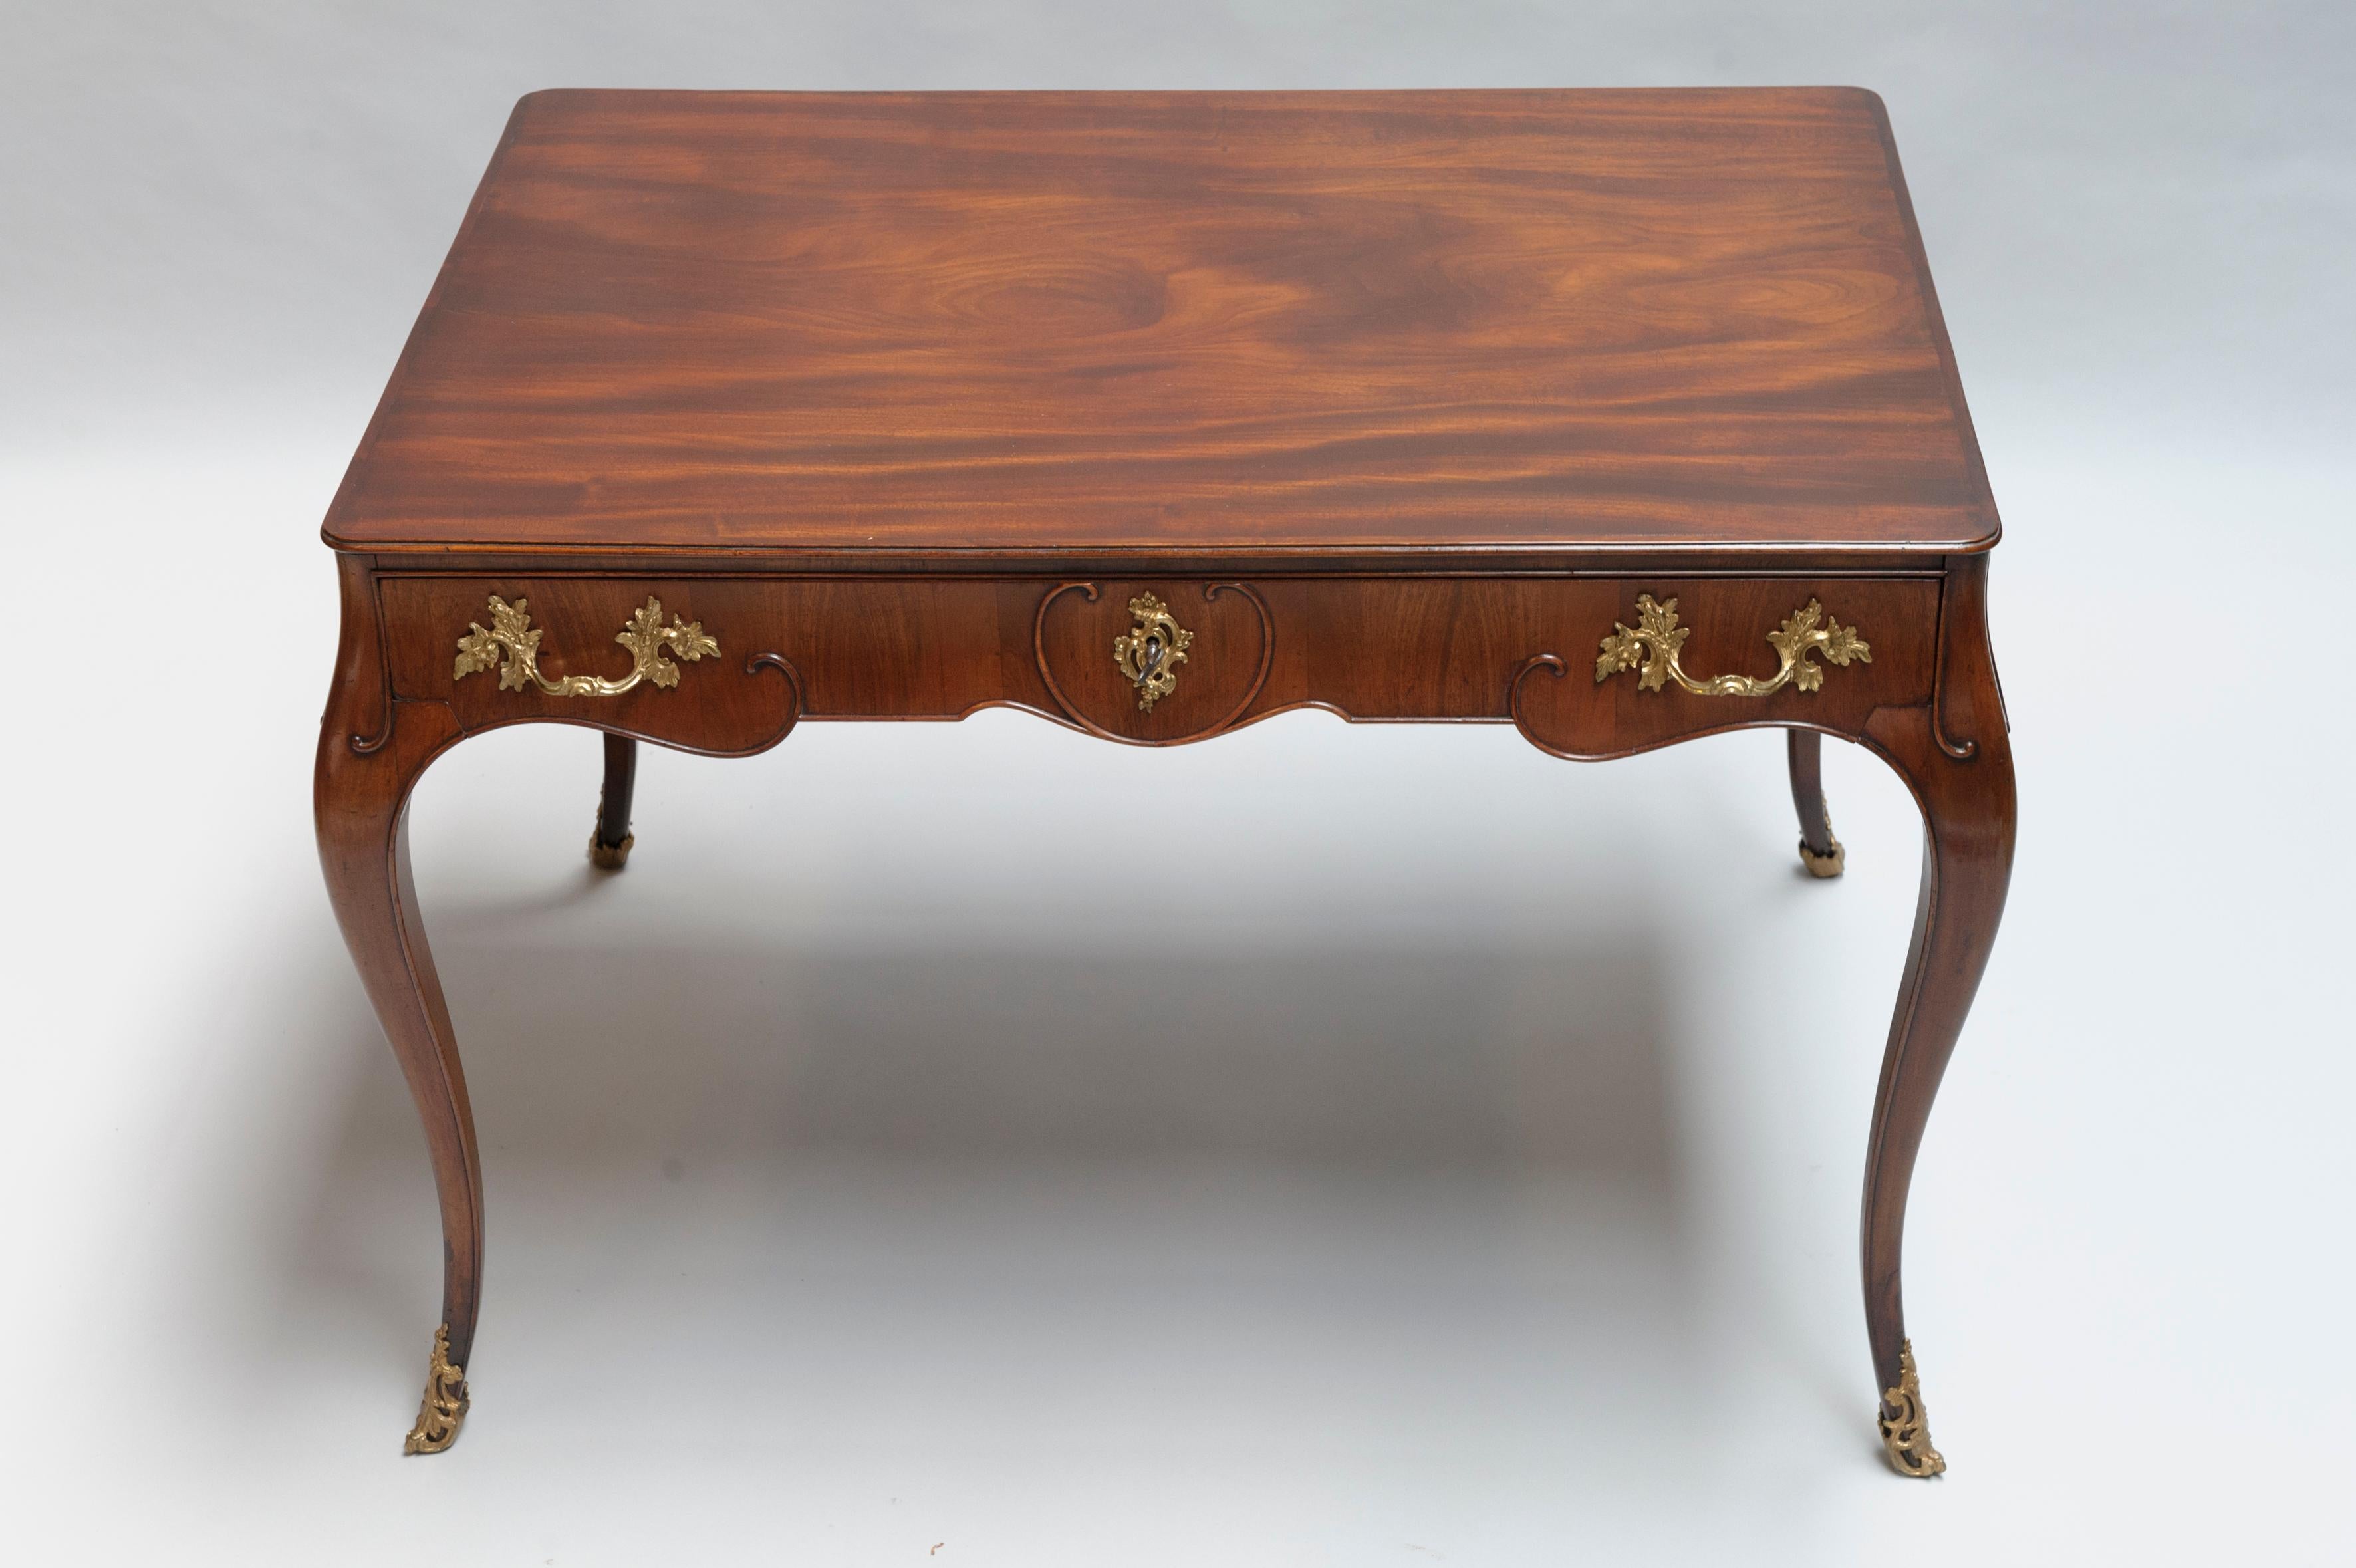 Writing table or ‘bureau plat’

Dutch 
Louis XV, third quarter of the 18th Century, ca. 1760-1770

Mahogany and oak veneered with mahogany, gold plated bronze fittings.  
H. 76,5 cm. W.  112 cm. D. 80 cm.

CATALOGUE NOTE
A fine Dutch Louise XV